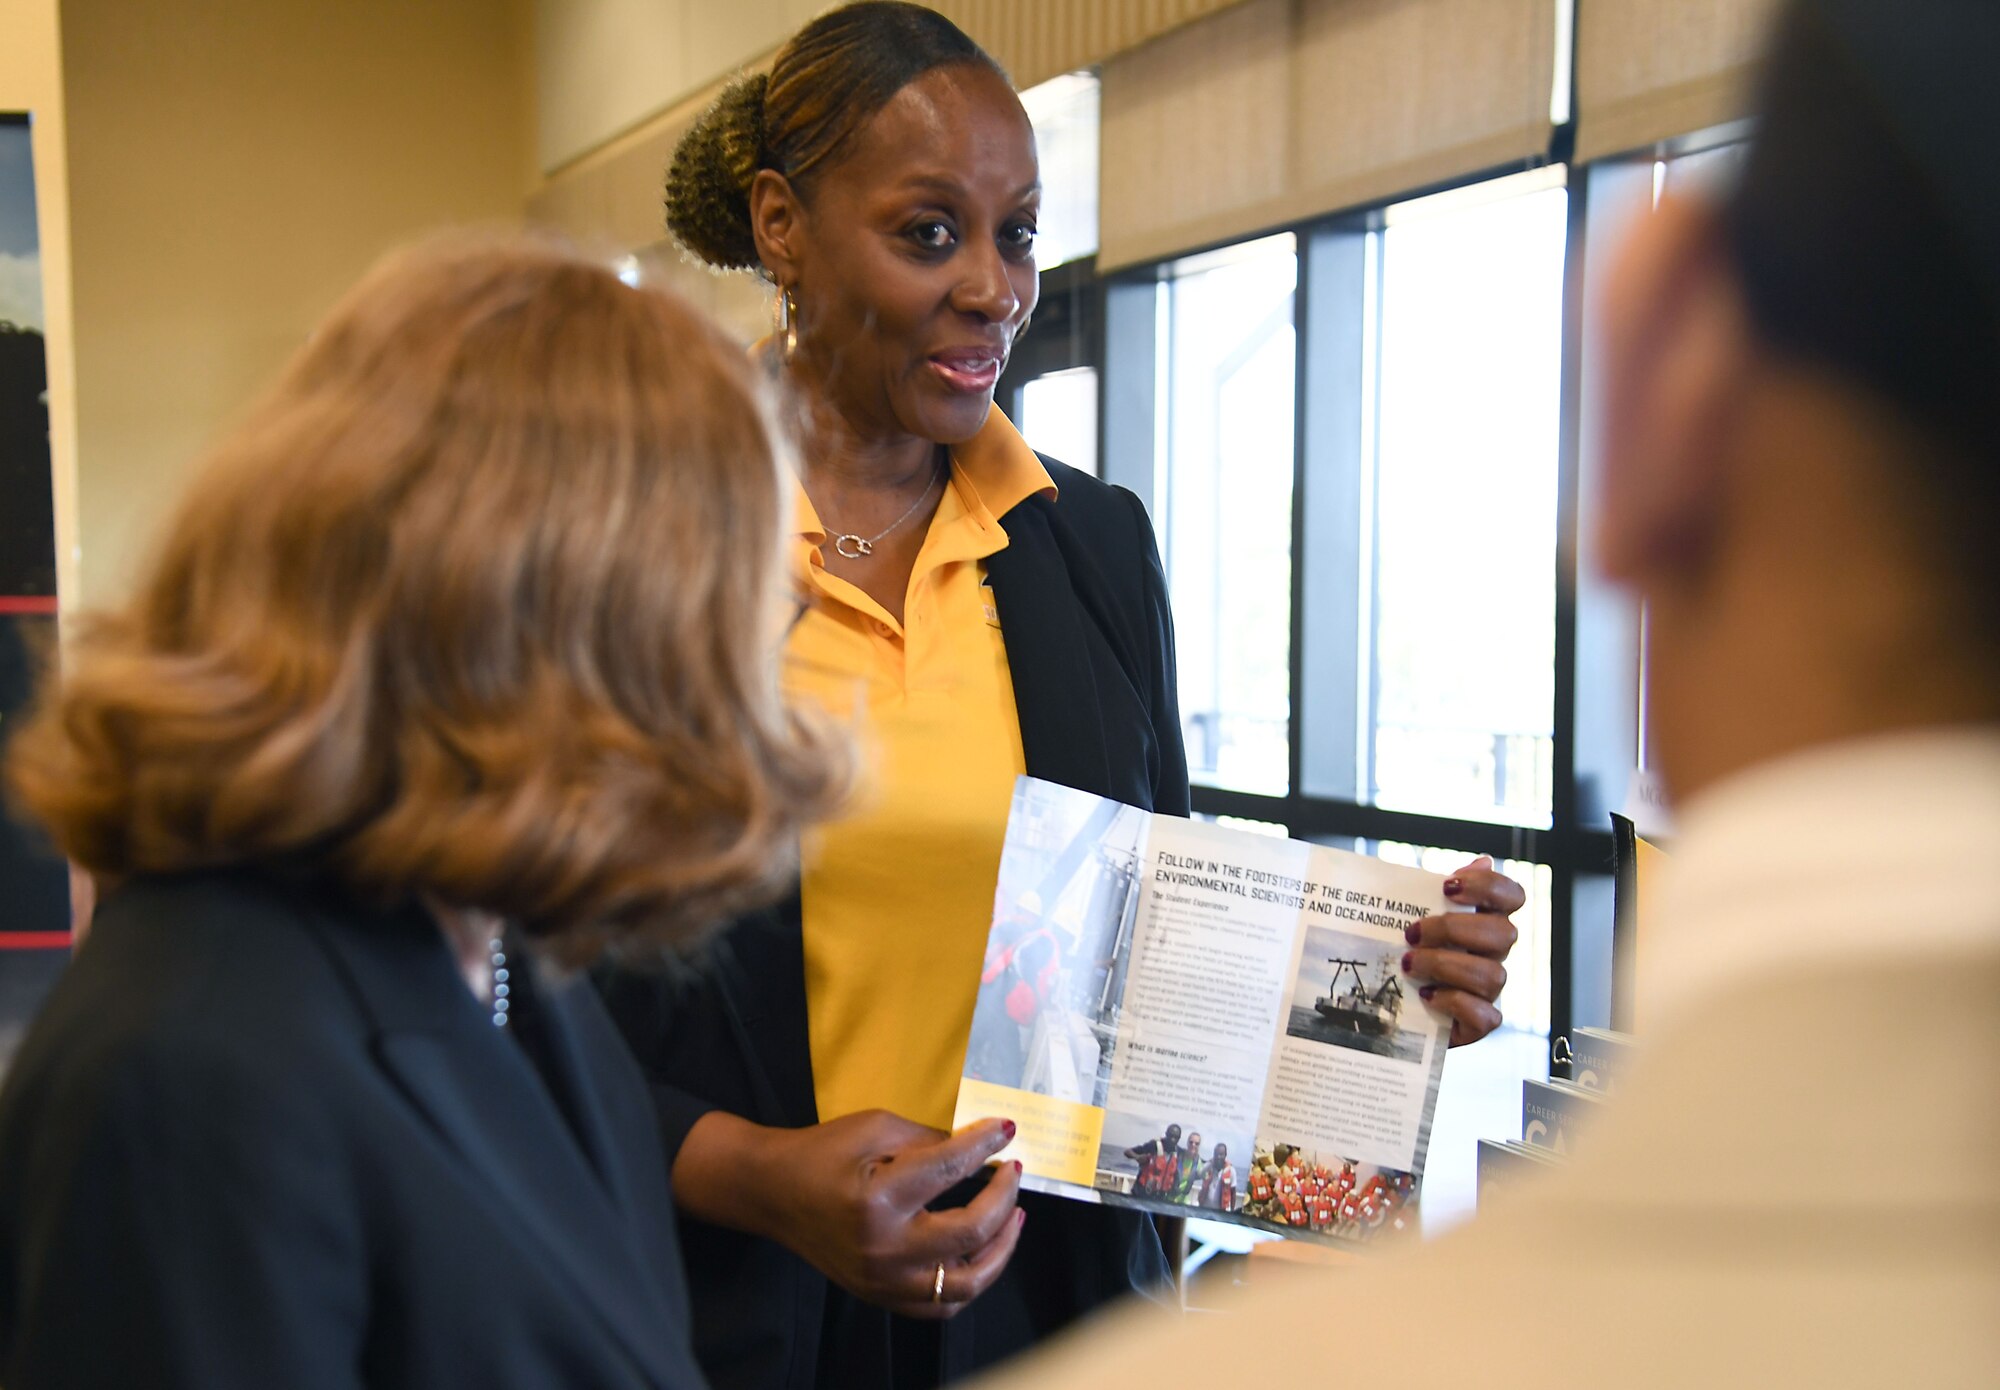 Mary Maner, University of Southern Mississippi career services assistant director, provides career information to Priscilla Williams and Kaitlyn Greer during the Keesler Job Fair inside the Bay Breeze Event Center at Keesler Air Force Base, Mississippi, Nov. 14, 2022.